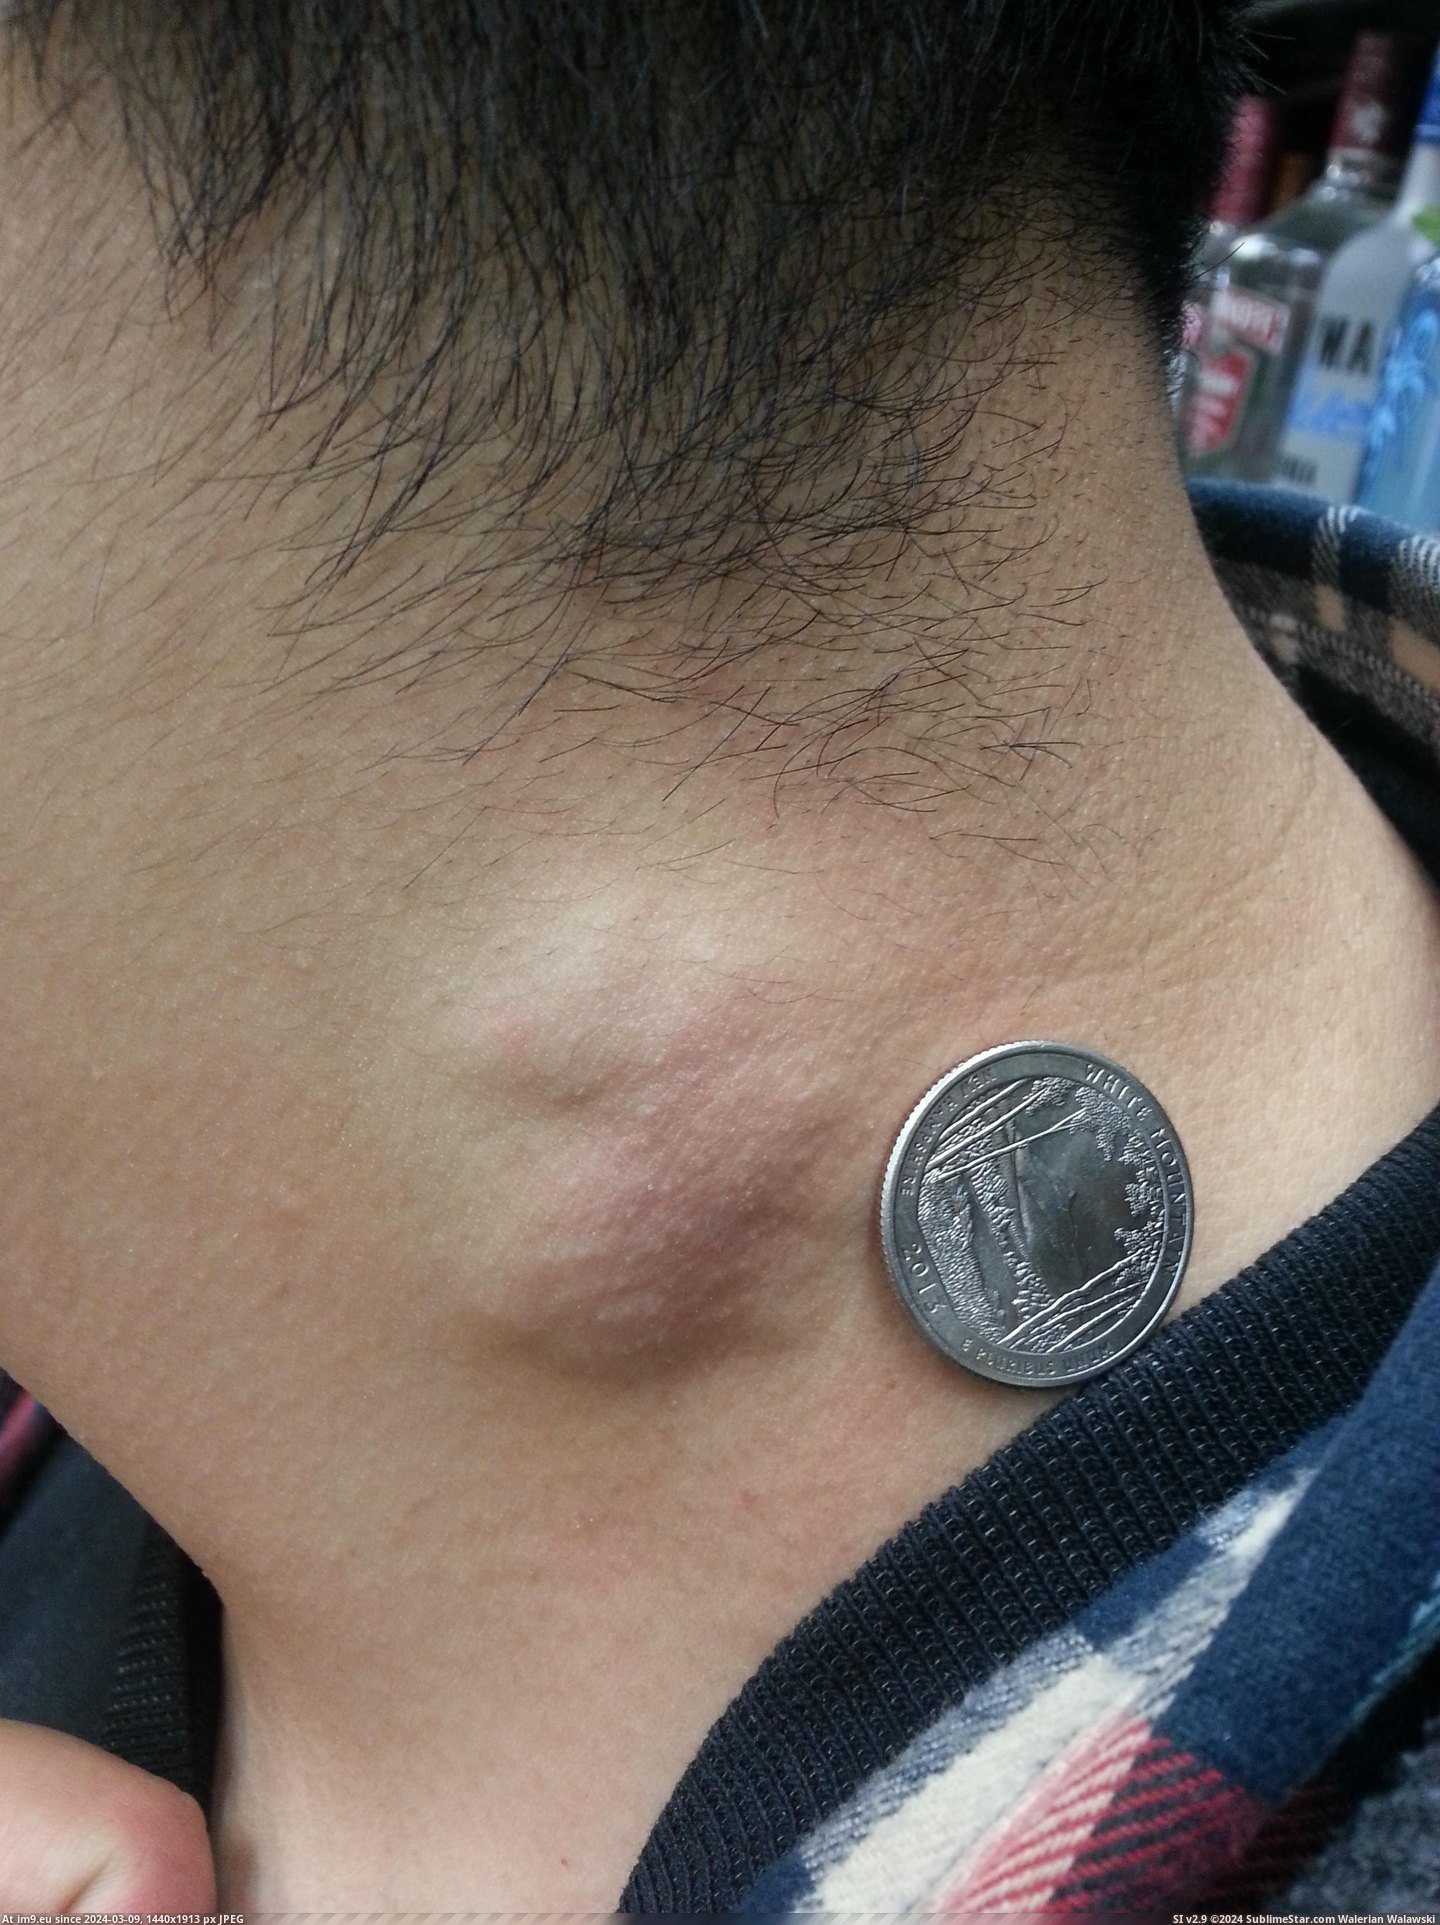 #Funny #Wtf #For #Happened #Banana #Quarter #Neck #Size #Feels #Hour #Worker [Wtf] Co-worker said my neck feels funny and an hour later this happened. Didn't have a banana so I used a quarter for size. Pic. (Изображение из альбом My r/WTF favs))